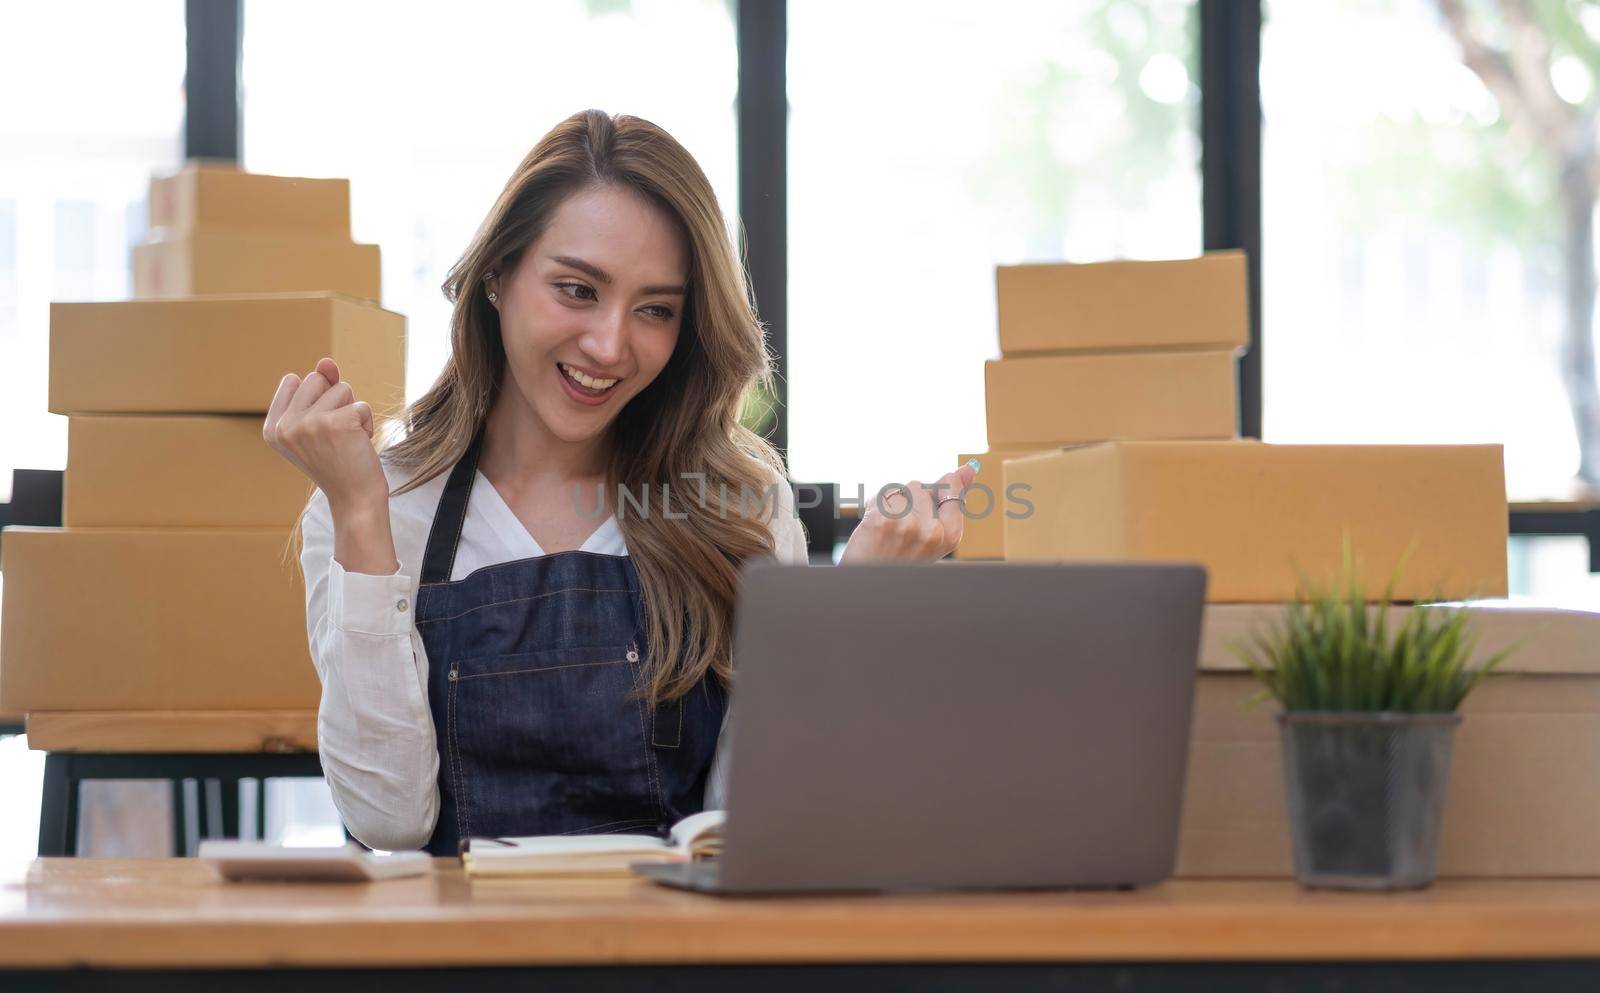 Portrait of Starting small businesses SME owners female entrepreneurs working on receipt box and check online orders to prepare to pack the boxes, sell to customers, SME business ideas online. by wichayada